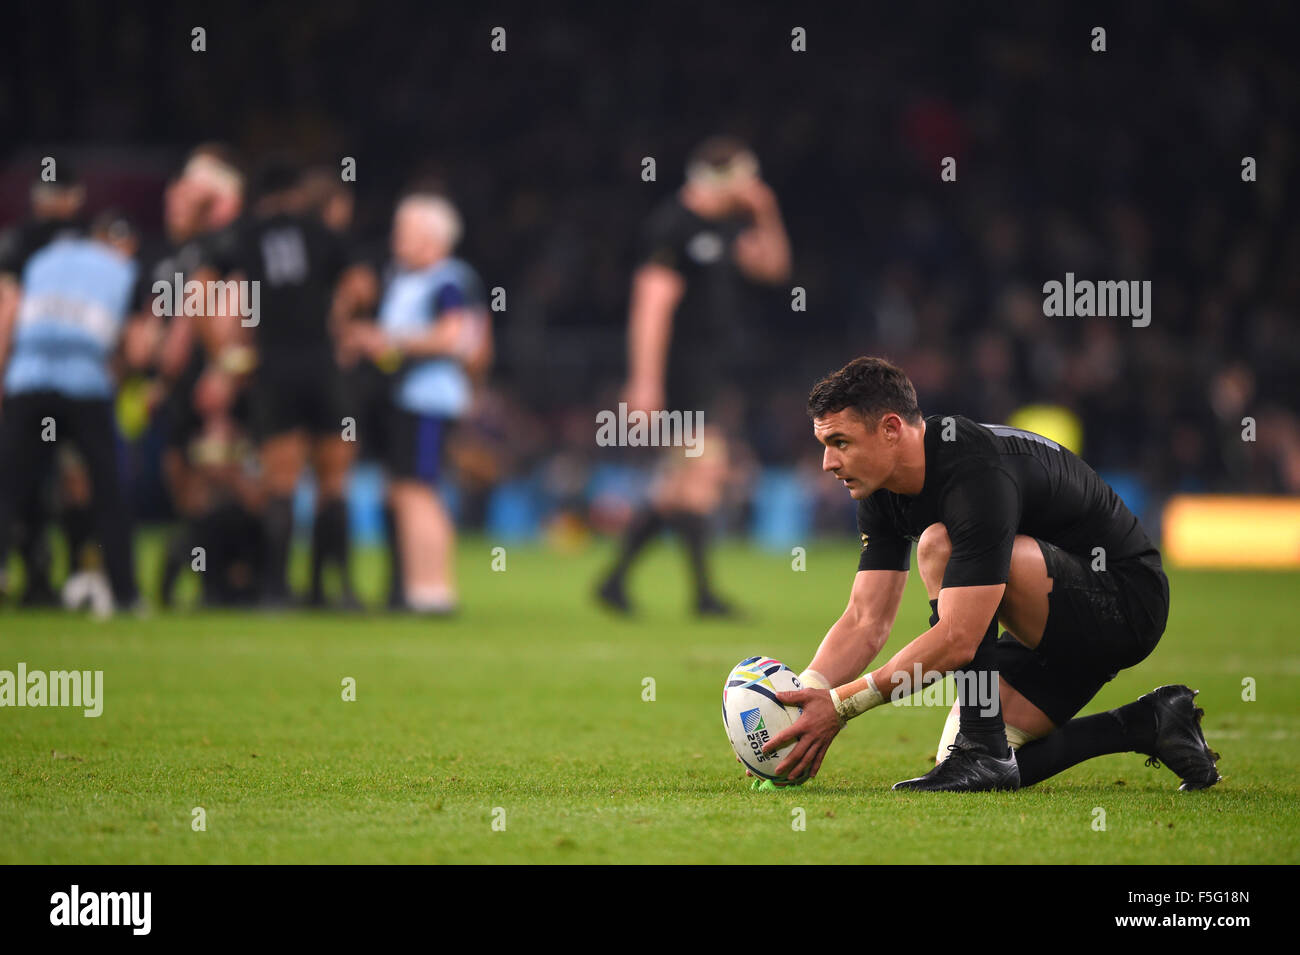 London, UK. 31st Oct, 2015. Dan Carter (NZL) Rugby : Dan Carter of New Zealand prepares to take a kick during the 2015 Rugby World Cup final match between New Zealand and Australia at Twickenham in London, England . © FAR EAST PRESS/AFLO/Alamy Live News Stock Photo